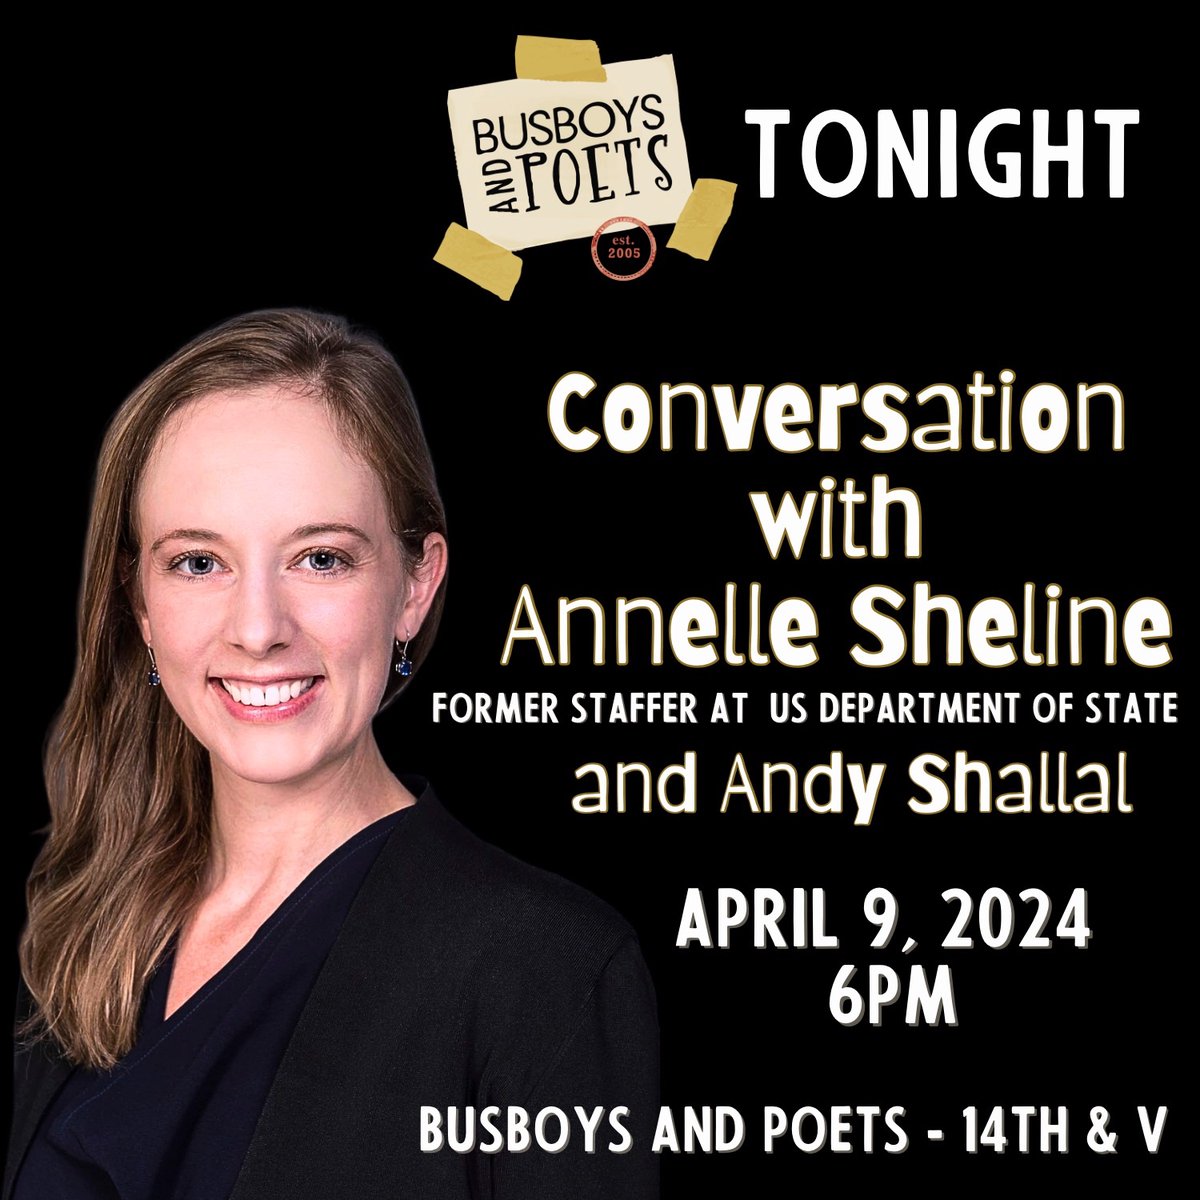 TONIGHT: @AnnelleSheline, former State Department official who resigned from her position in protest against the United States' support for Israel's recent offensive in Gaza RSVP: busboysandpoets.com/events/th-evt-…